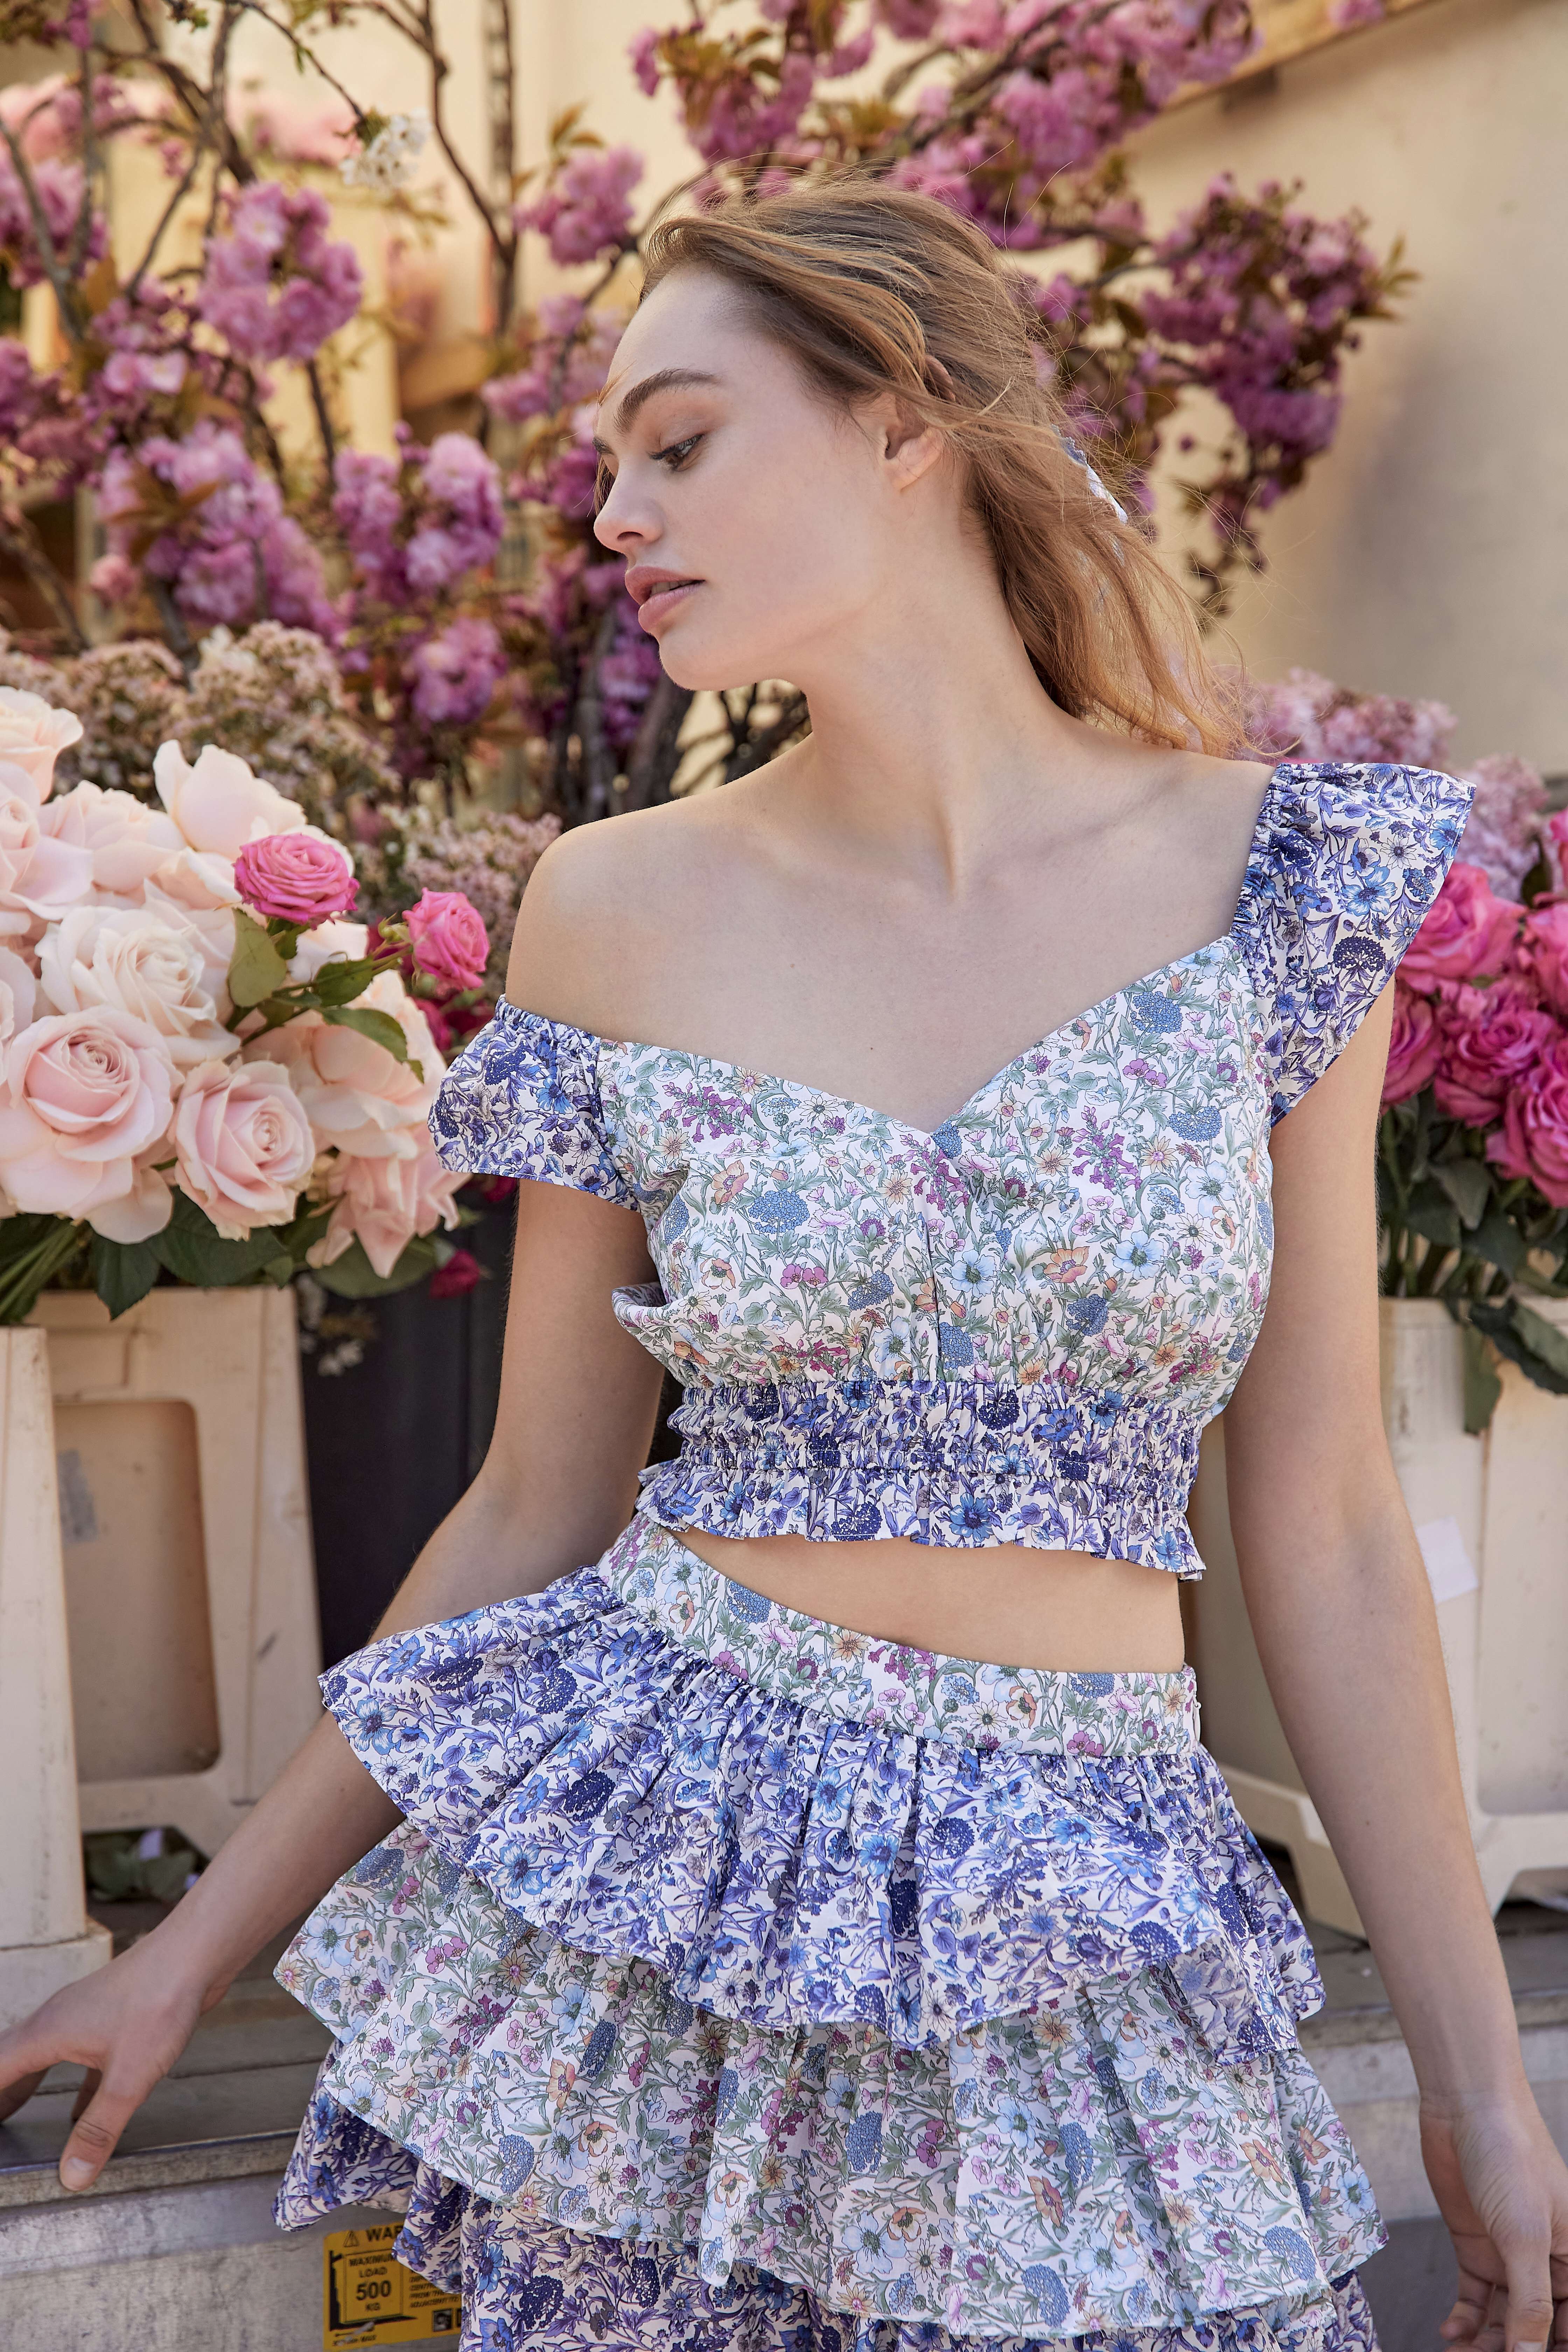 LoveShackFancy's New 'Made with Liberty Fabrics' Collection